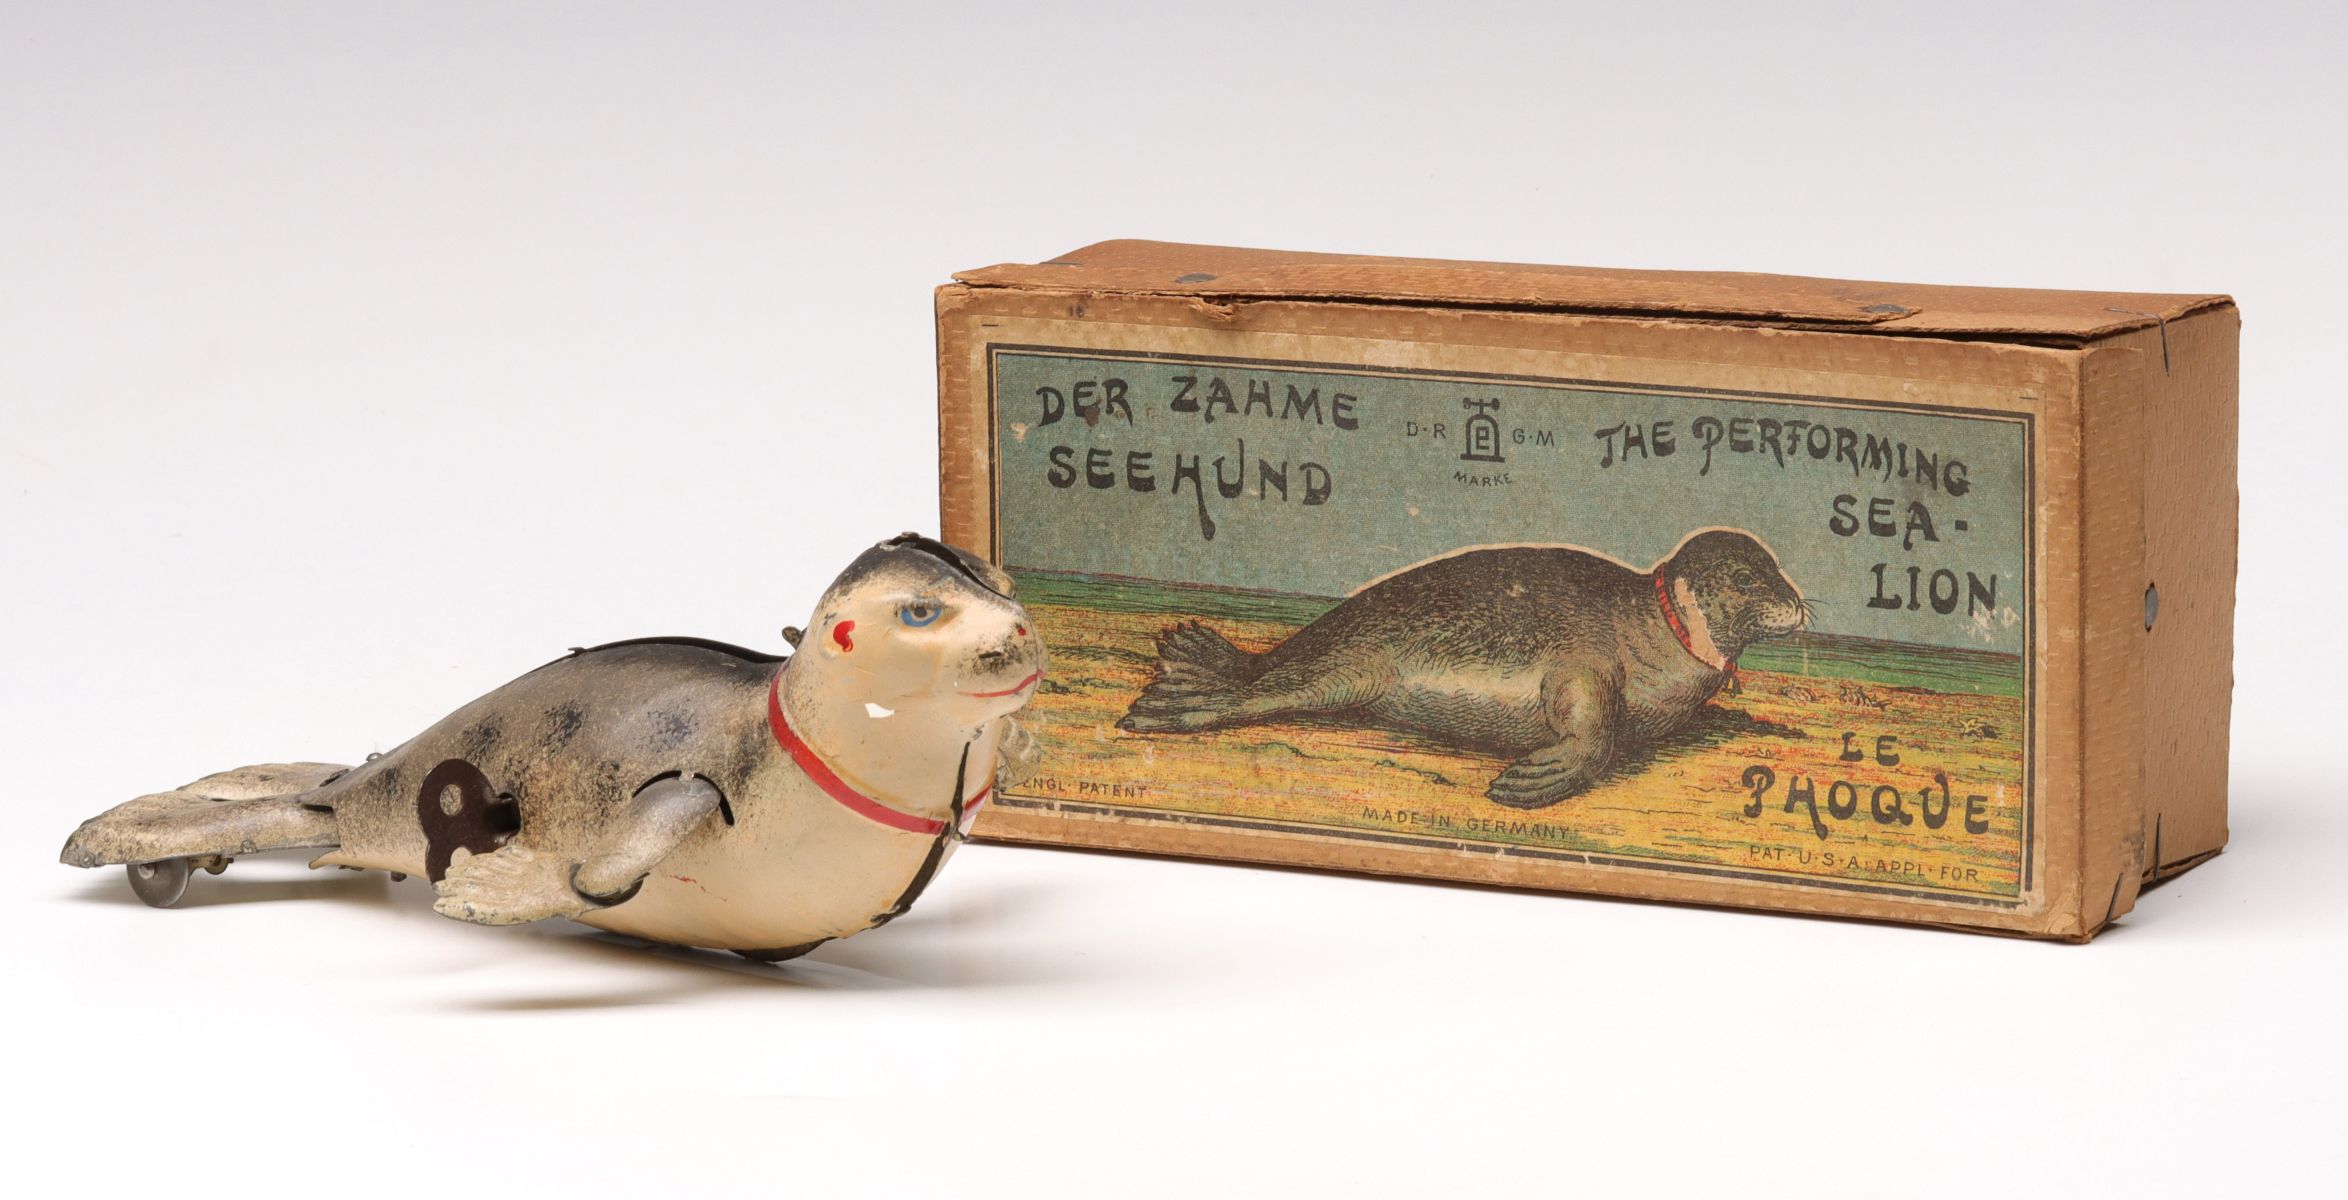 A LEHMANN PERFORMING SEA LION TIN WIND-UP IN BOX